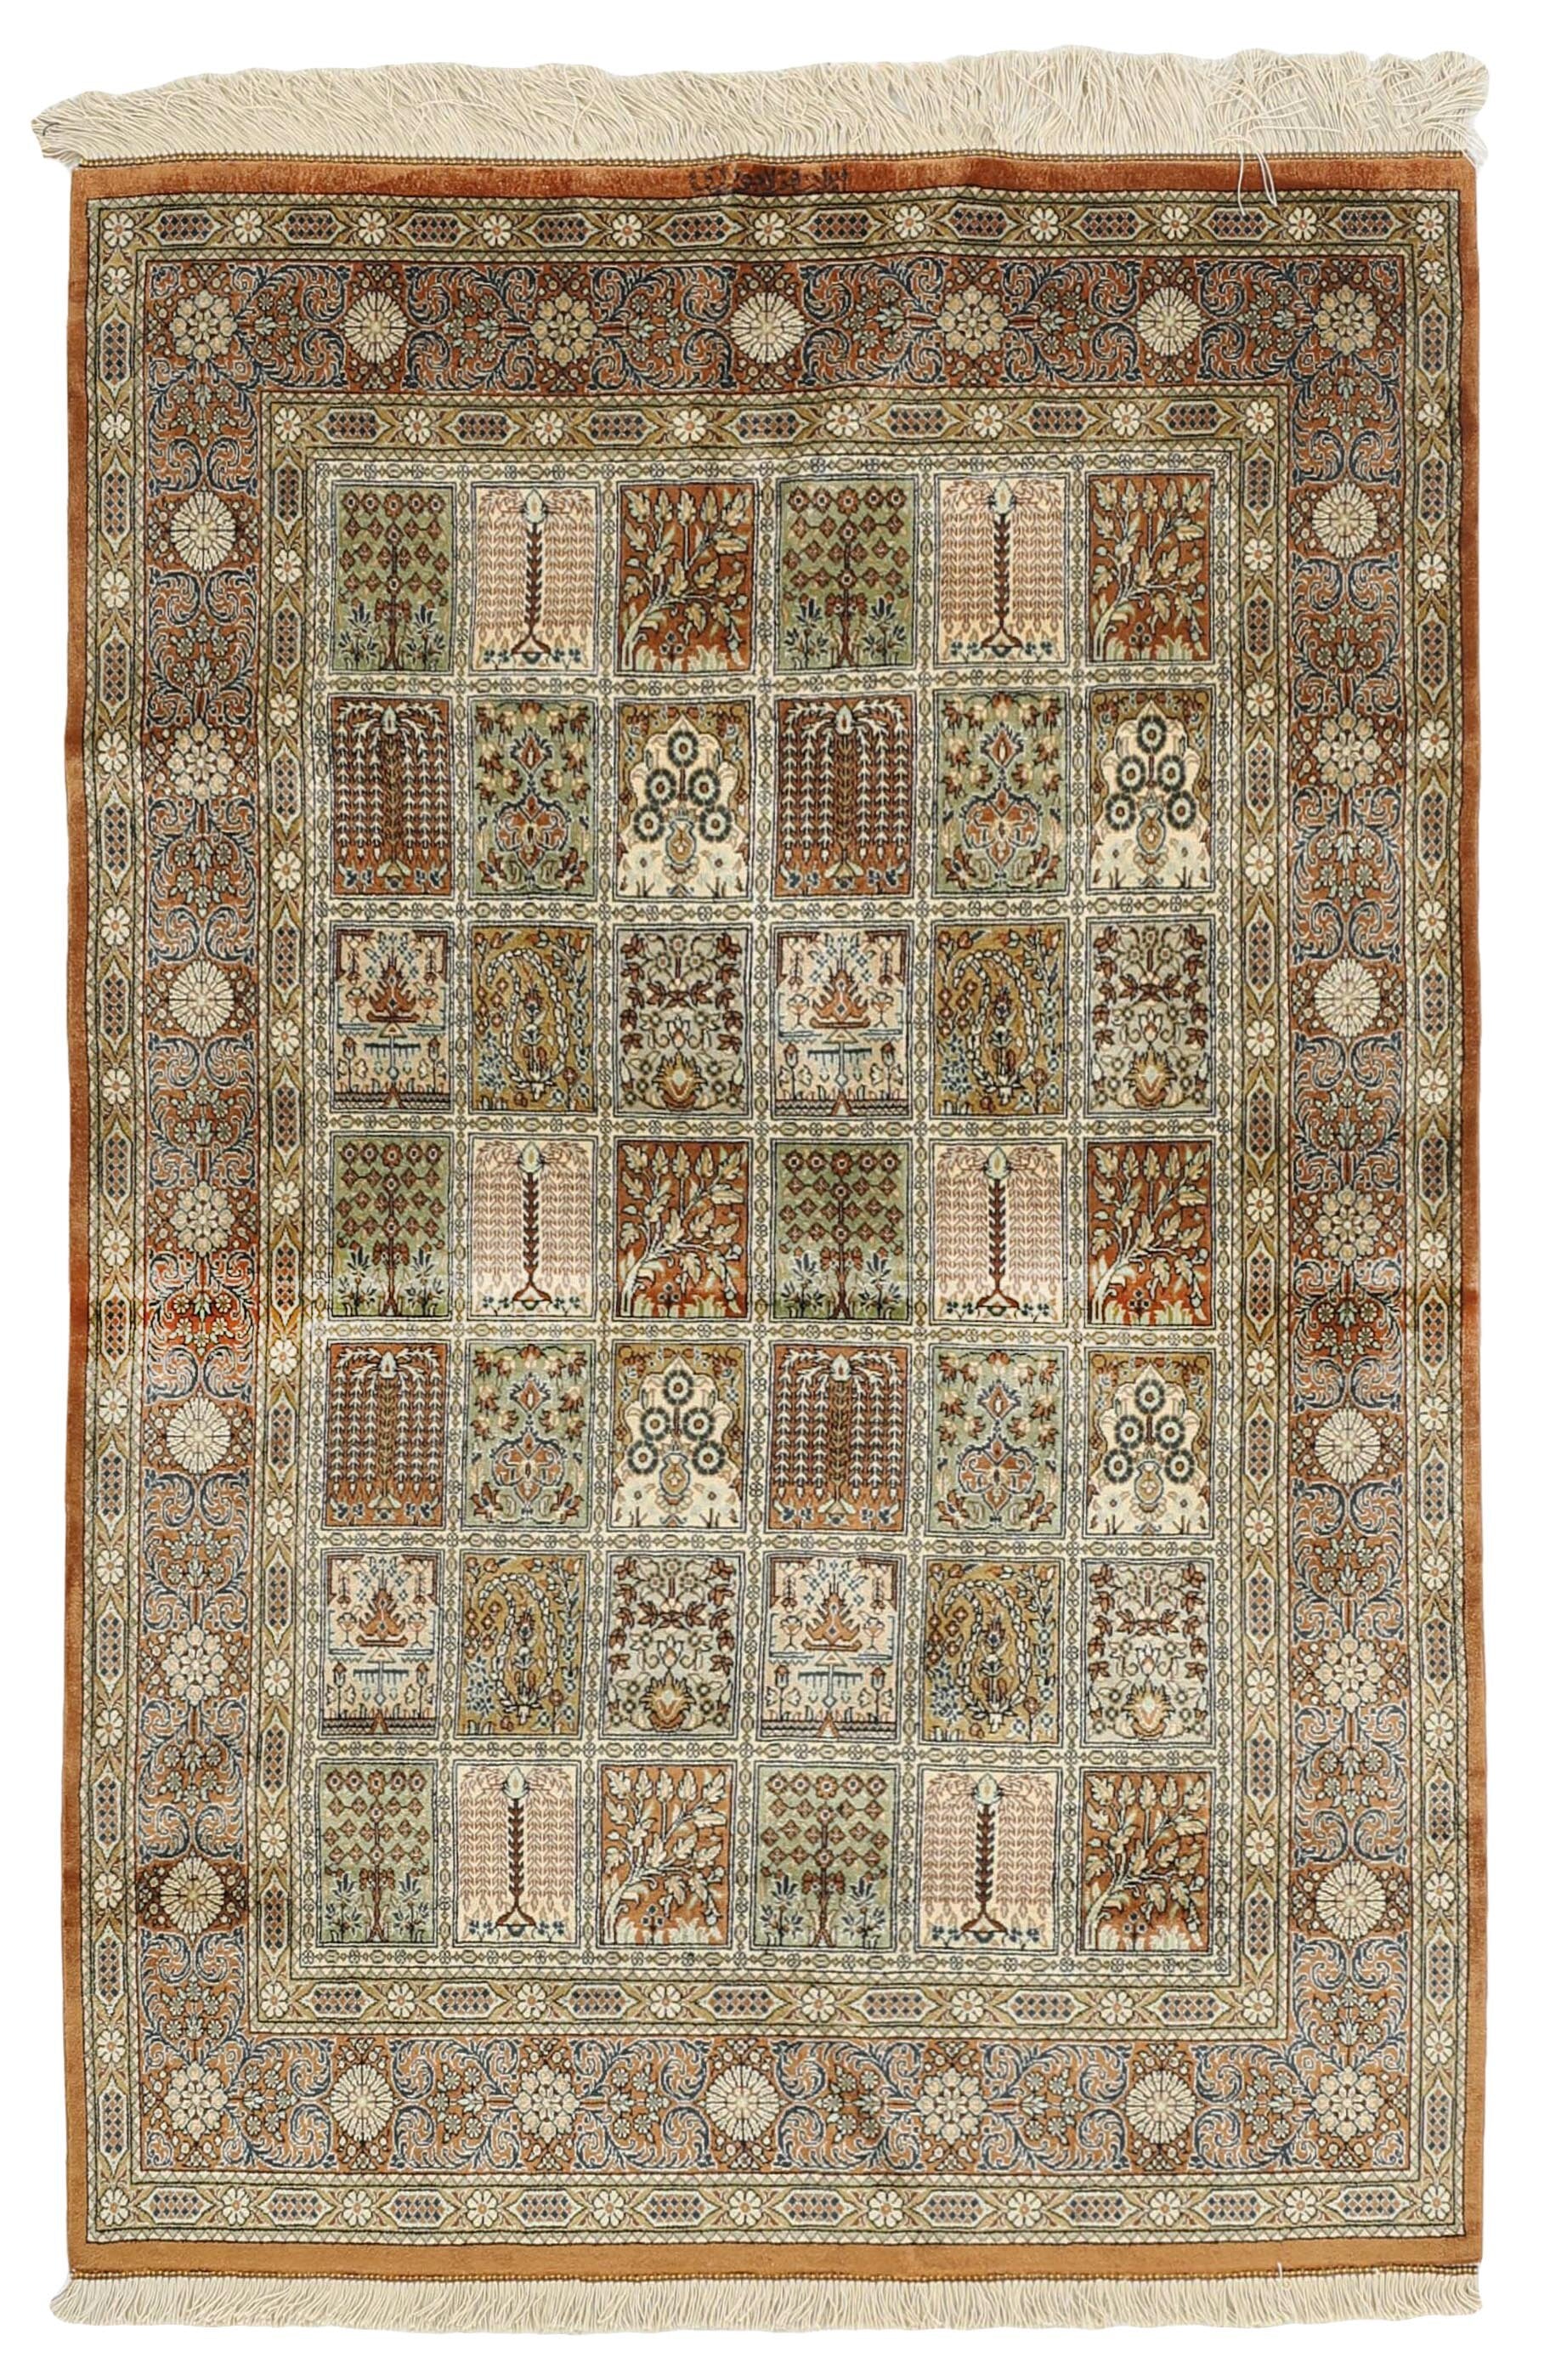 Authentic persian rug with a traditional floral design in beige